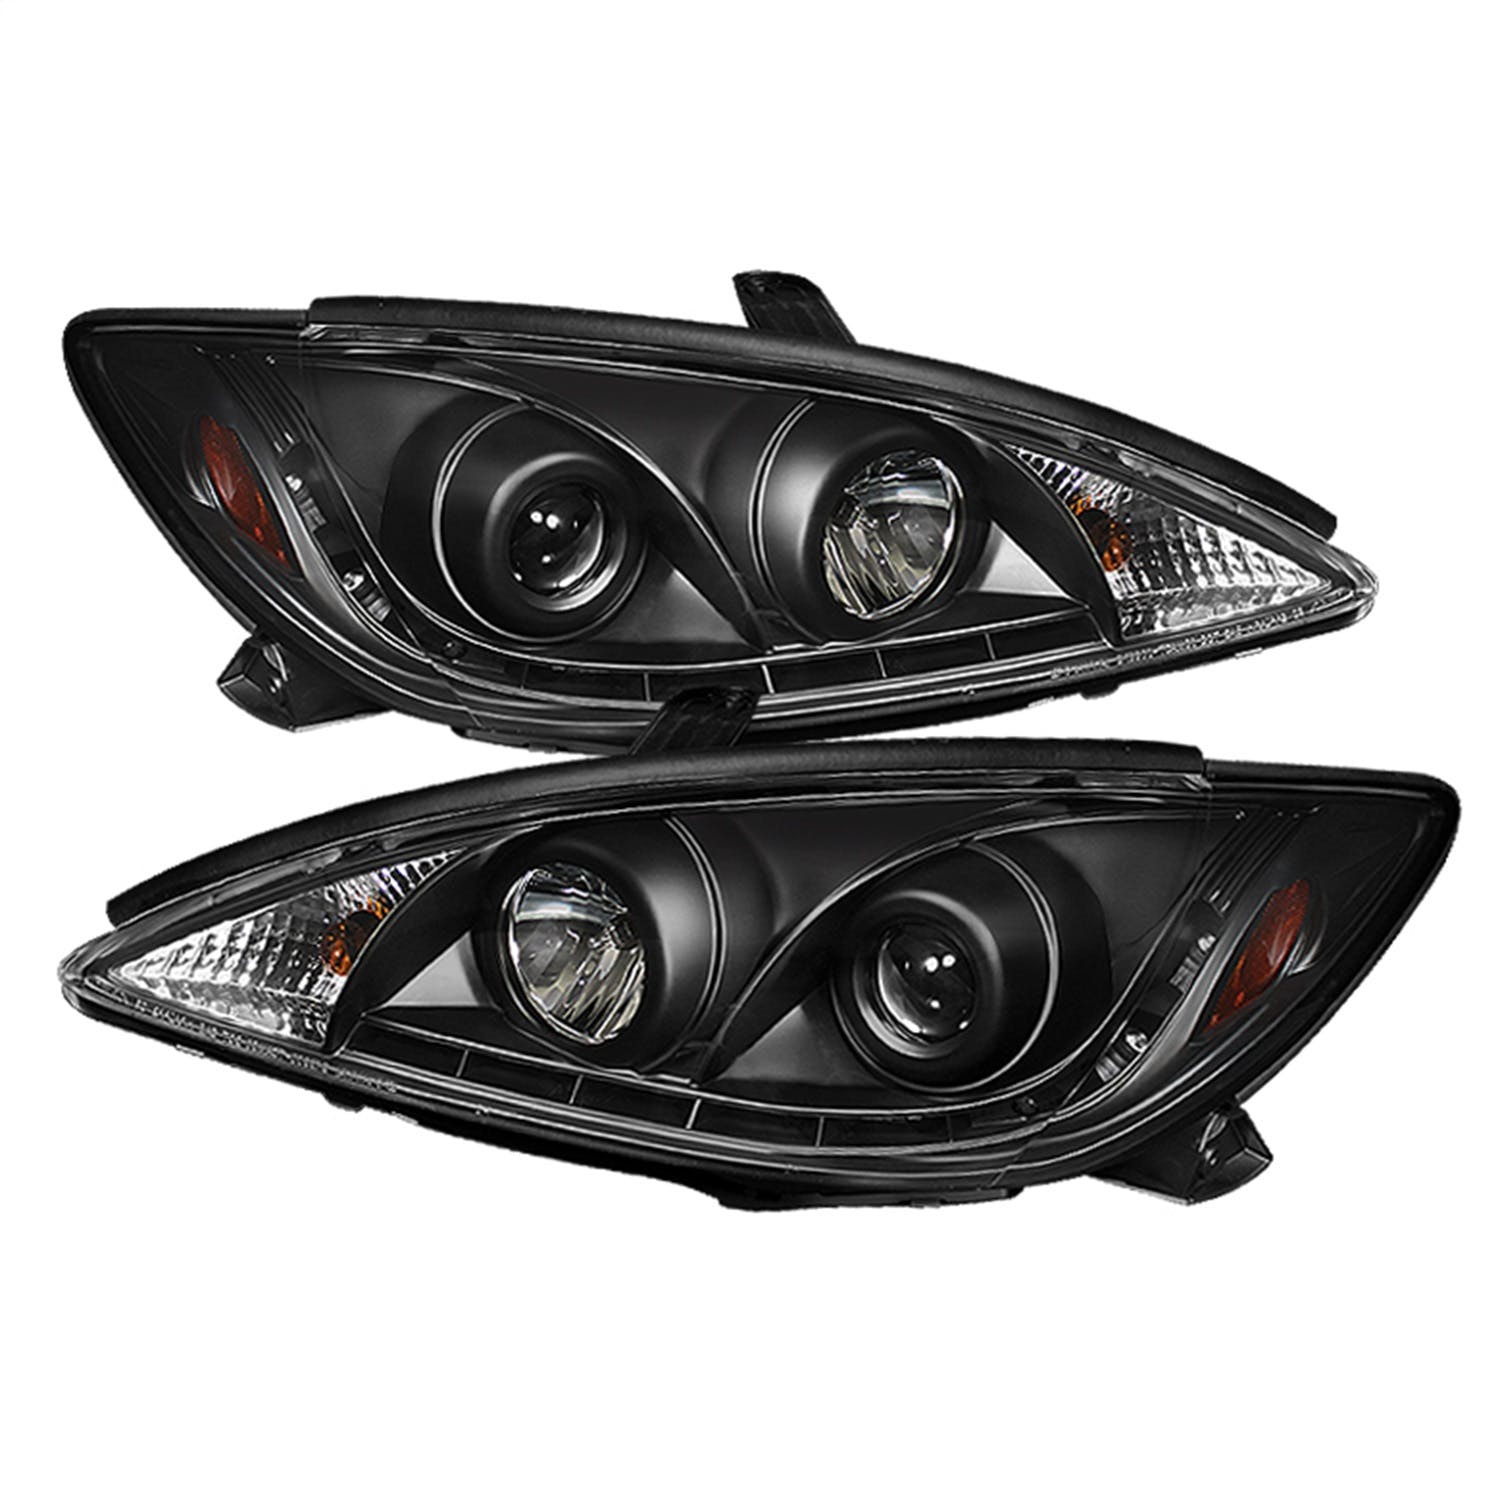 Spyder Auto 5042798 (Spyder) Toyota Camry 02-06 Projector Headlights-DRL-Black-High H1 (Included)-Lo